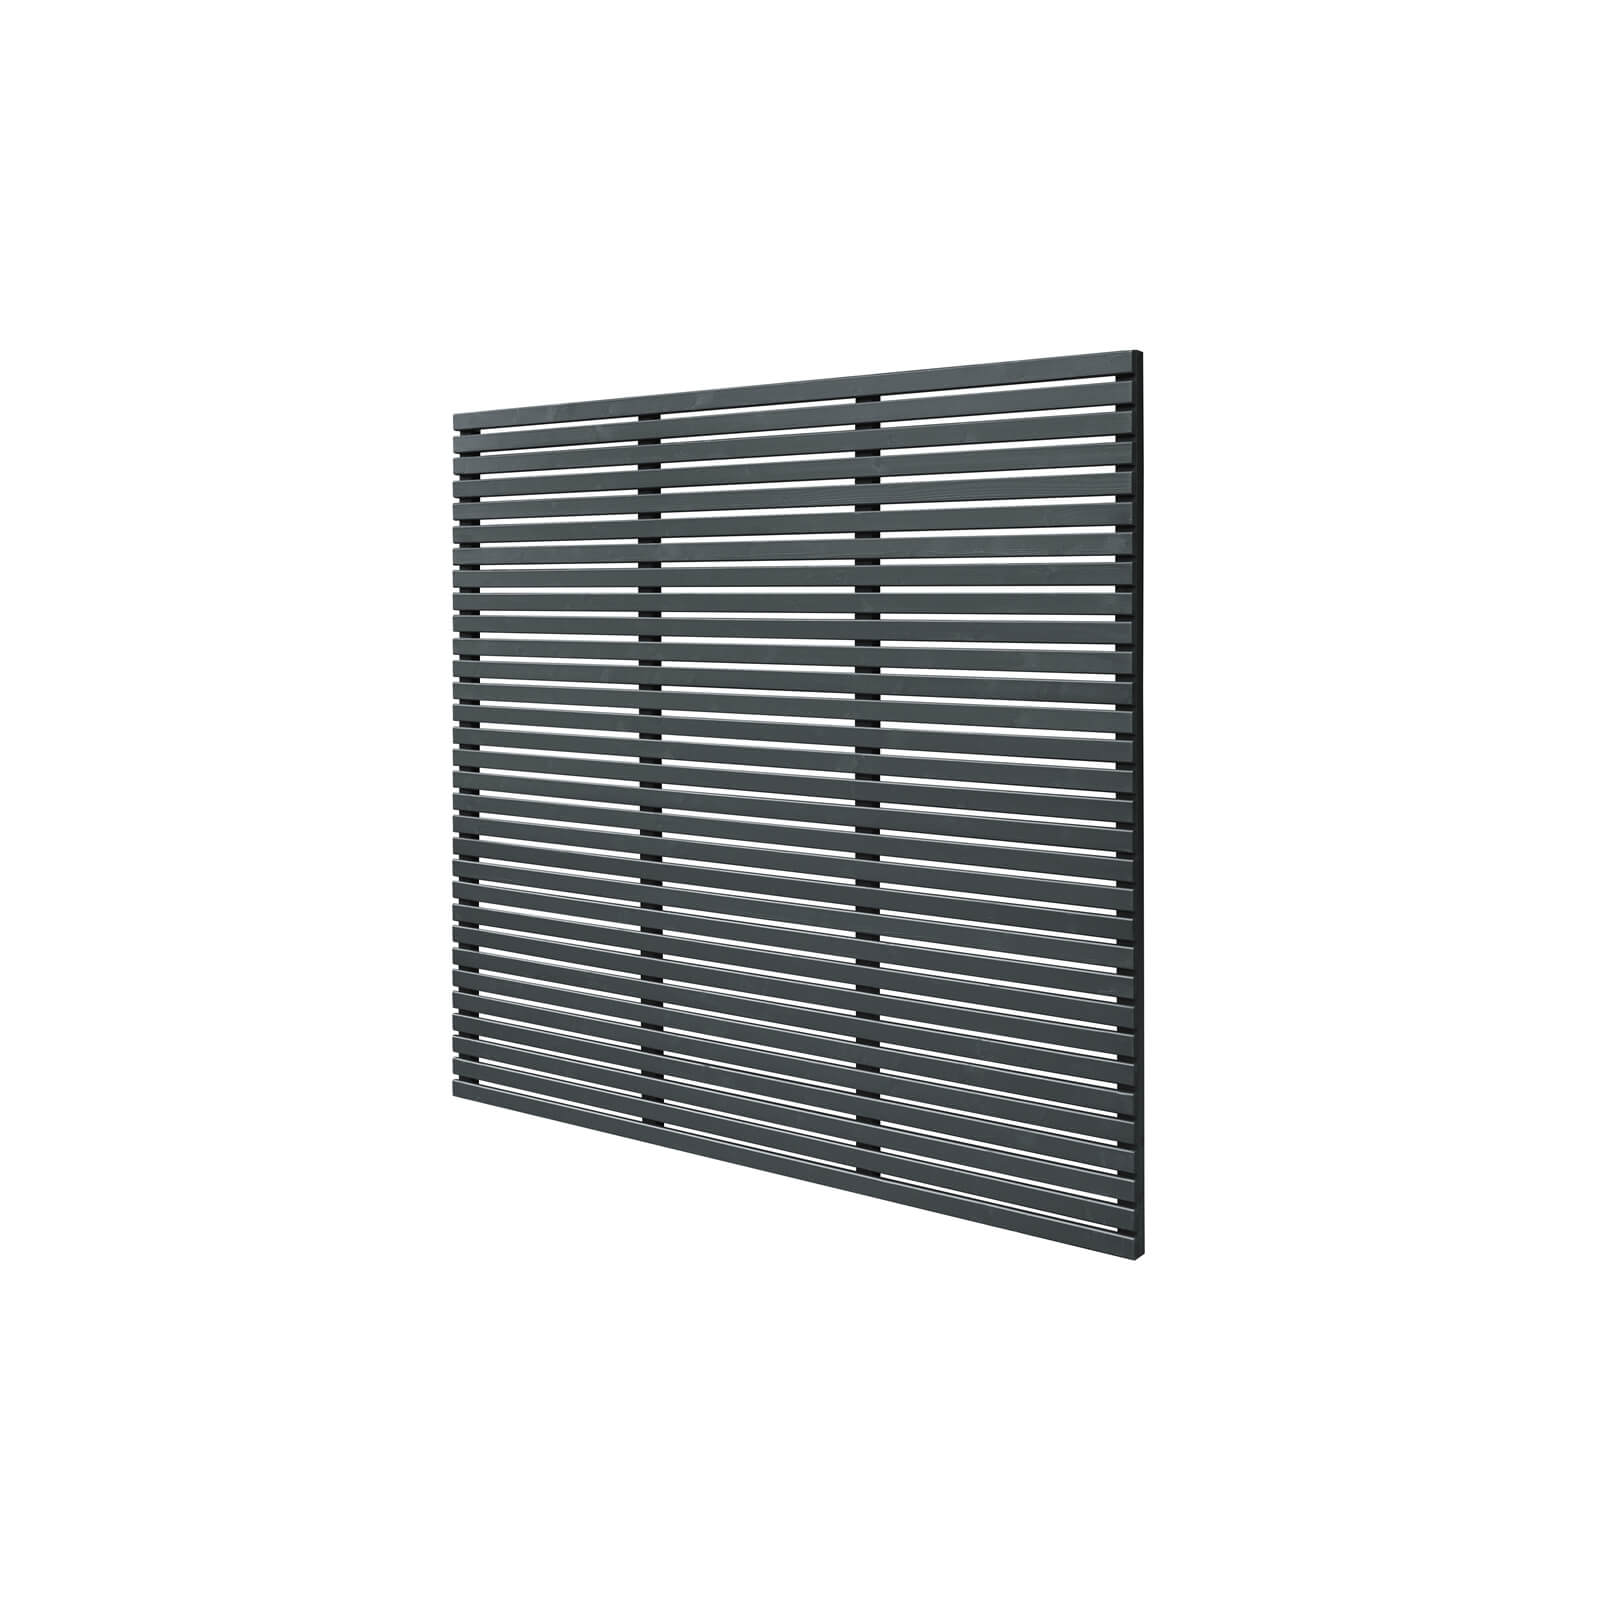 6ft x 6ft (1.8m x 1.8m) Grey Painted Contemporary Slatted Fence Panel - Pack of 5